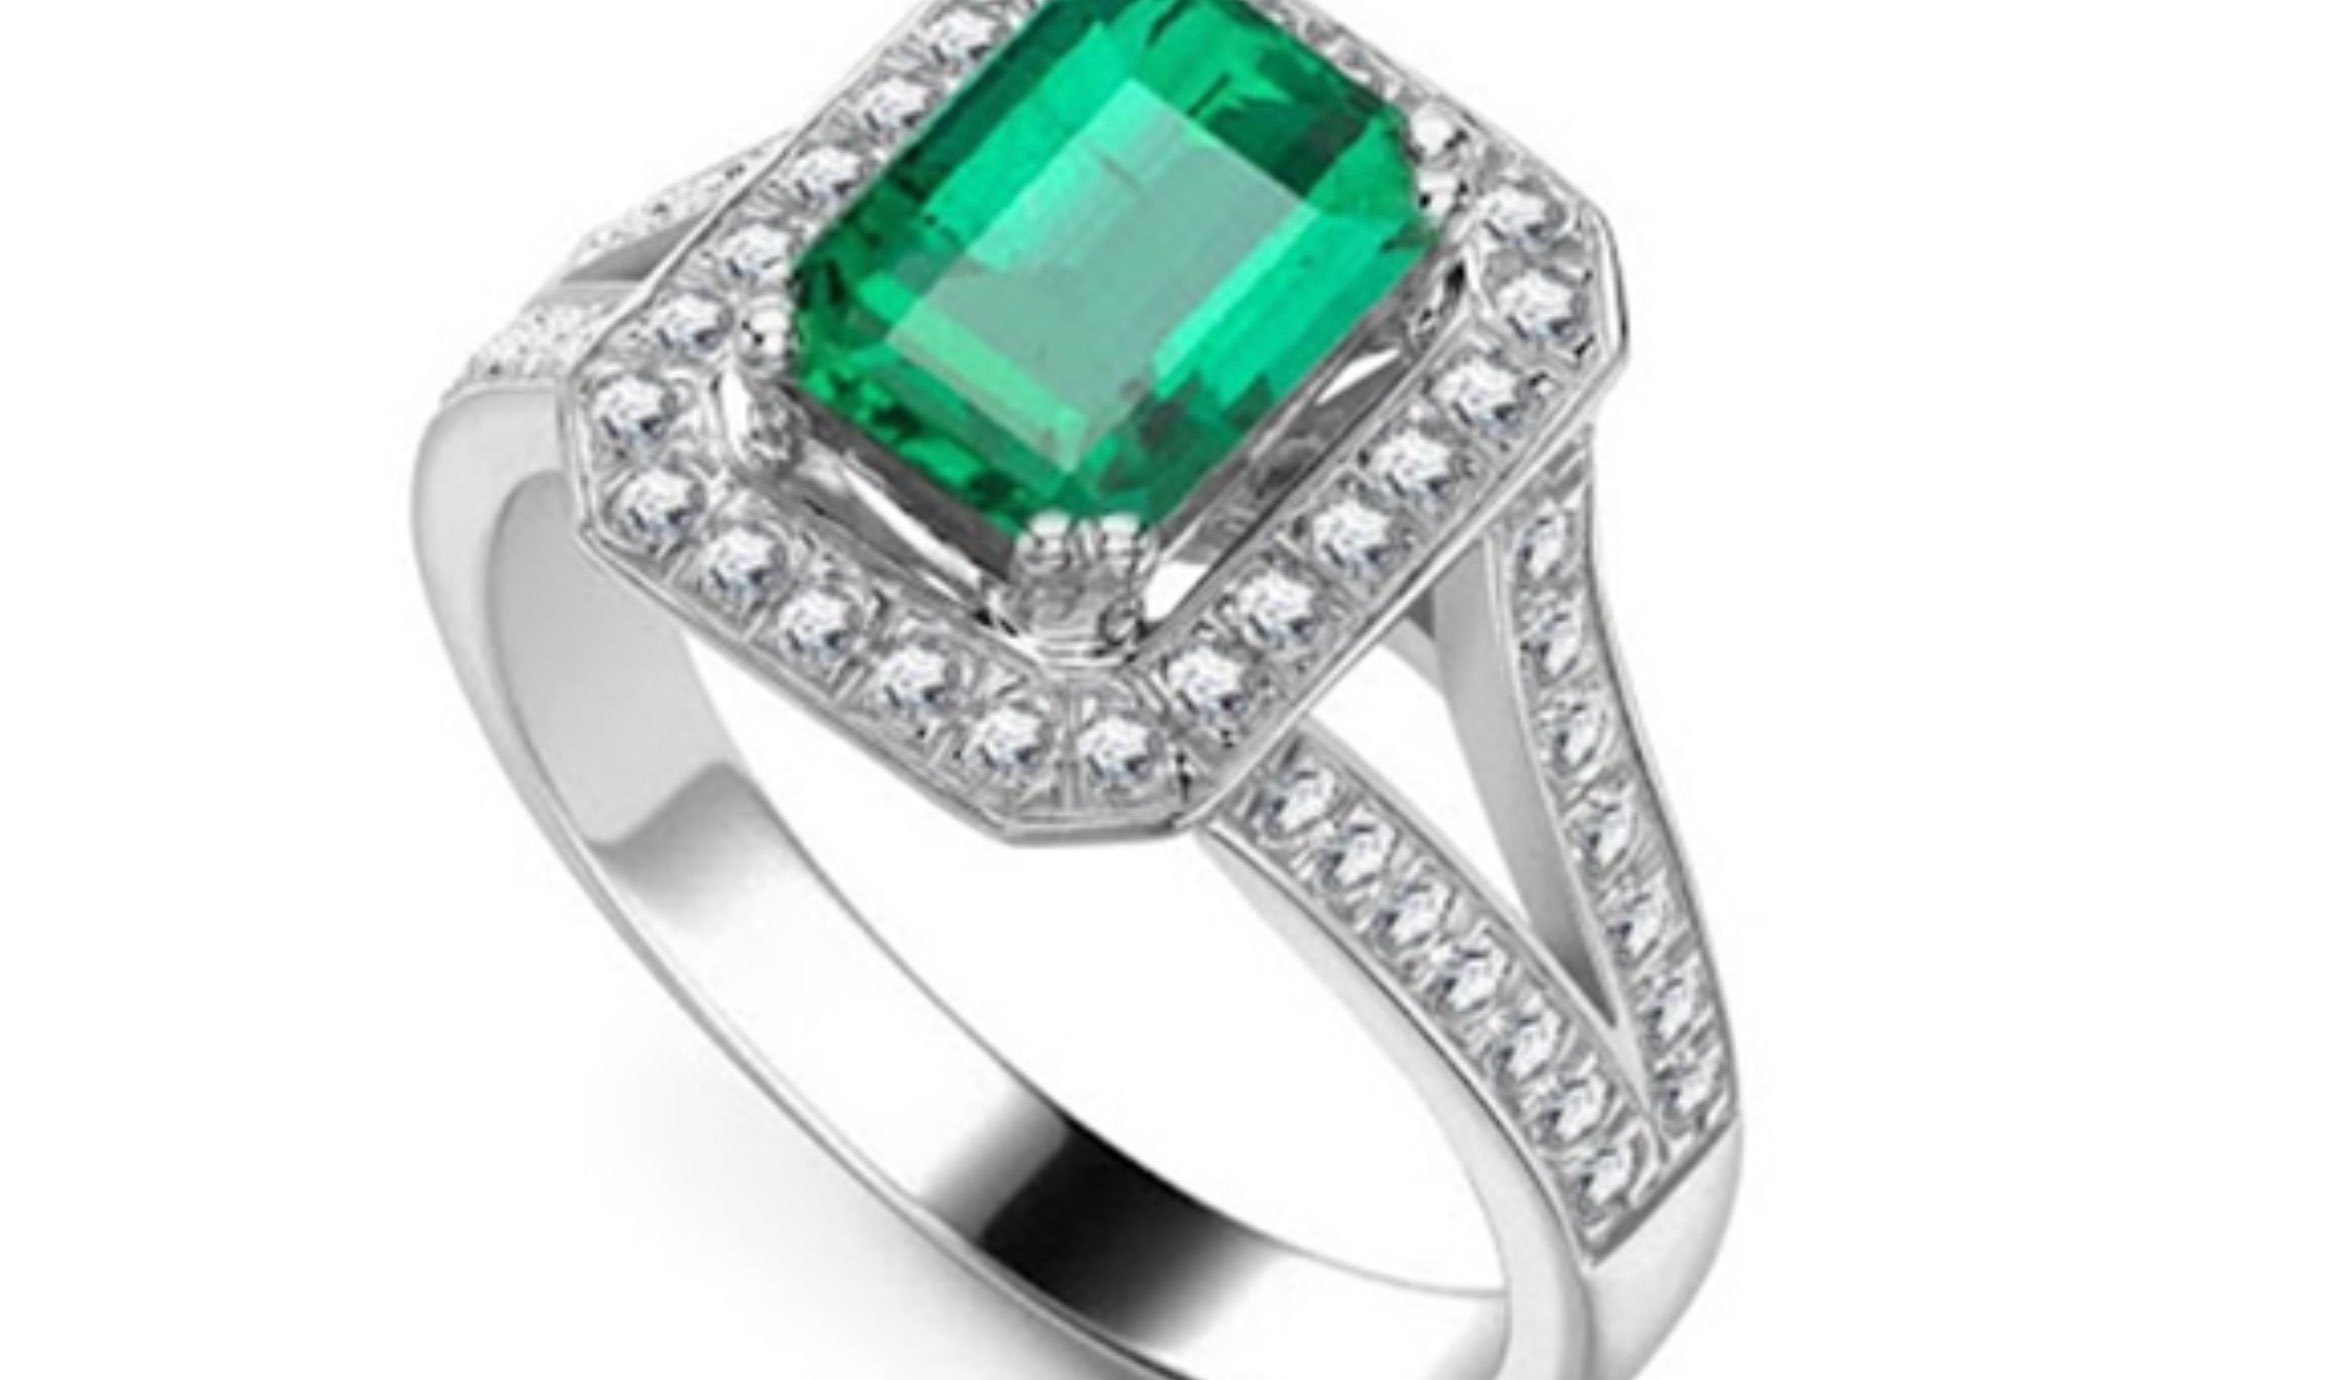 Is an Emerald Engagement Ring Right For You?